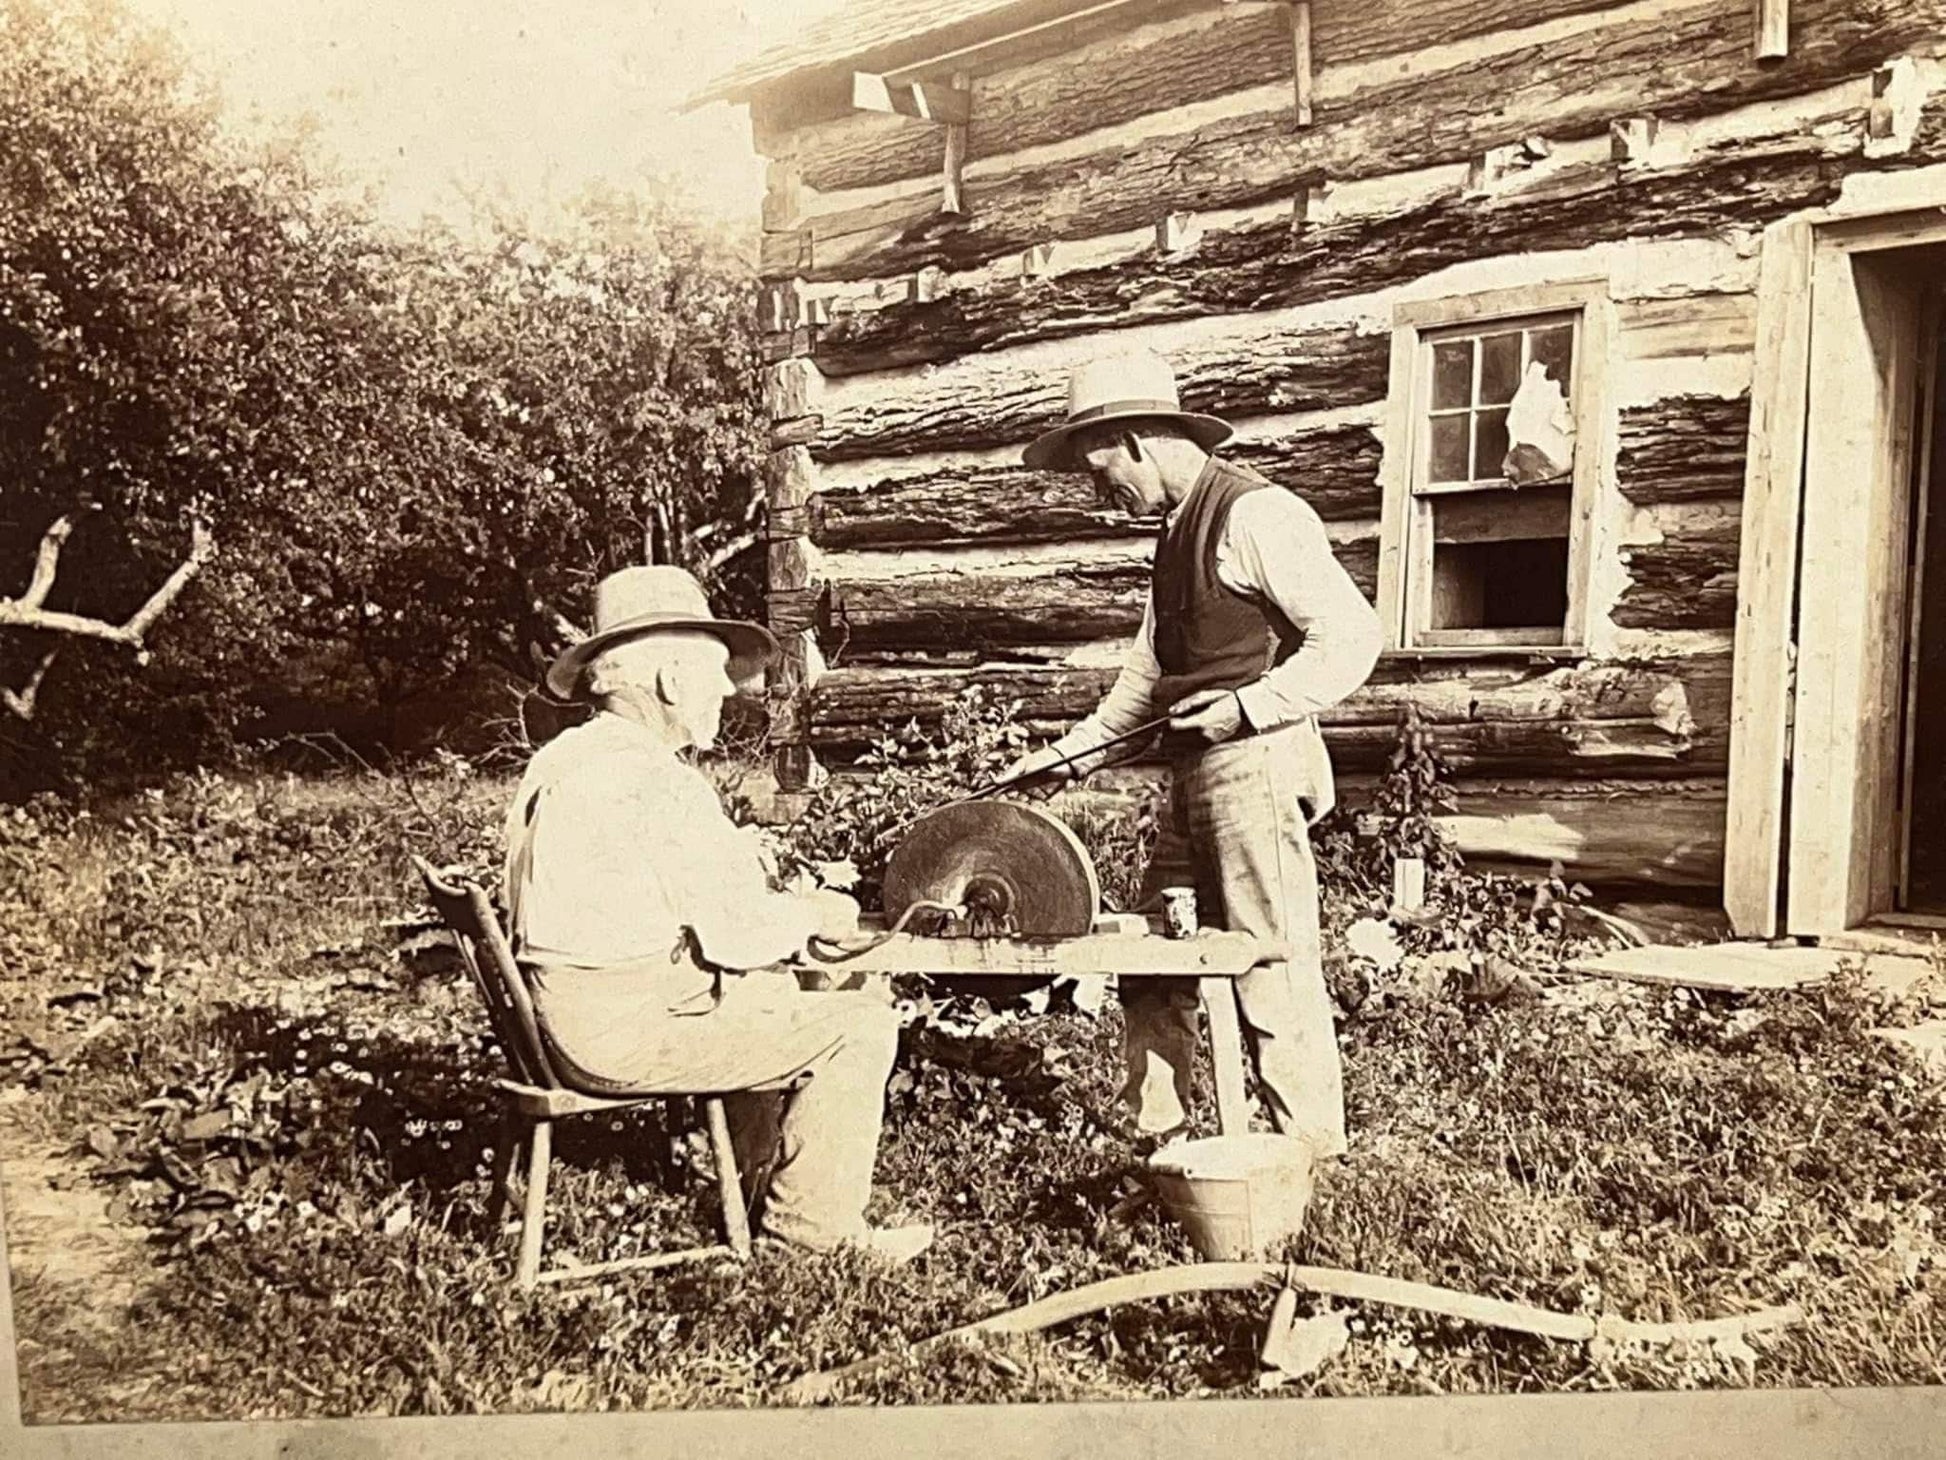 Antique photo 1890s rural occupational 2 farmers outside log cabin using grind wheel to sharpen sye blade